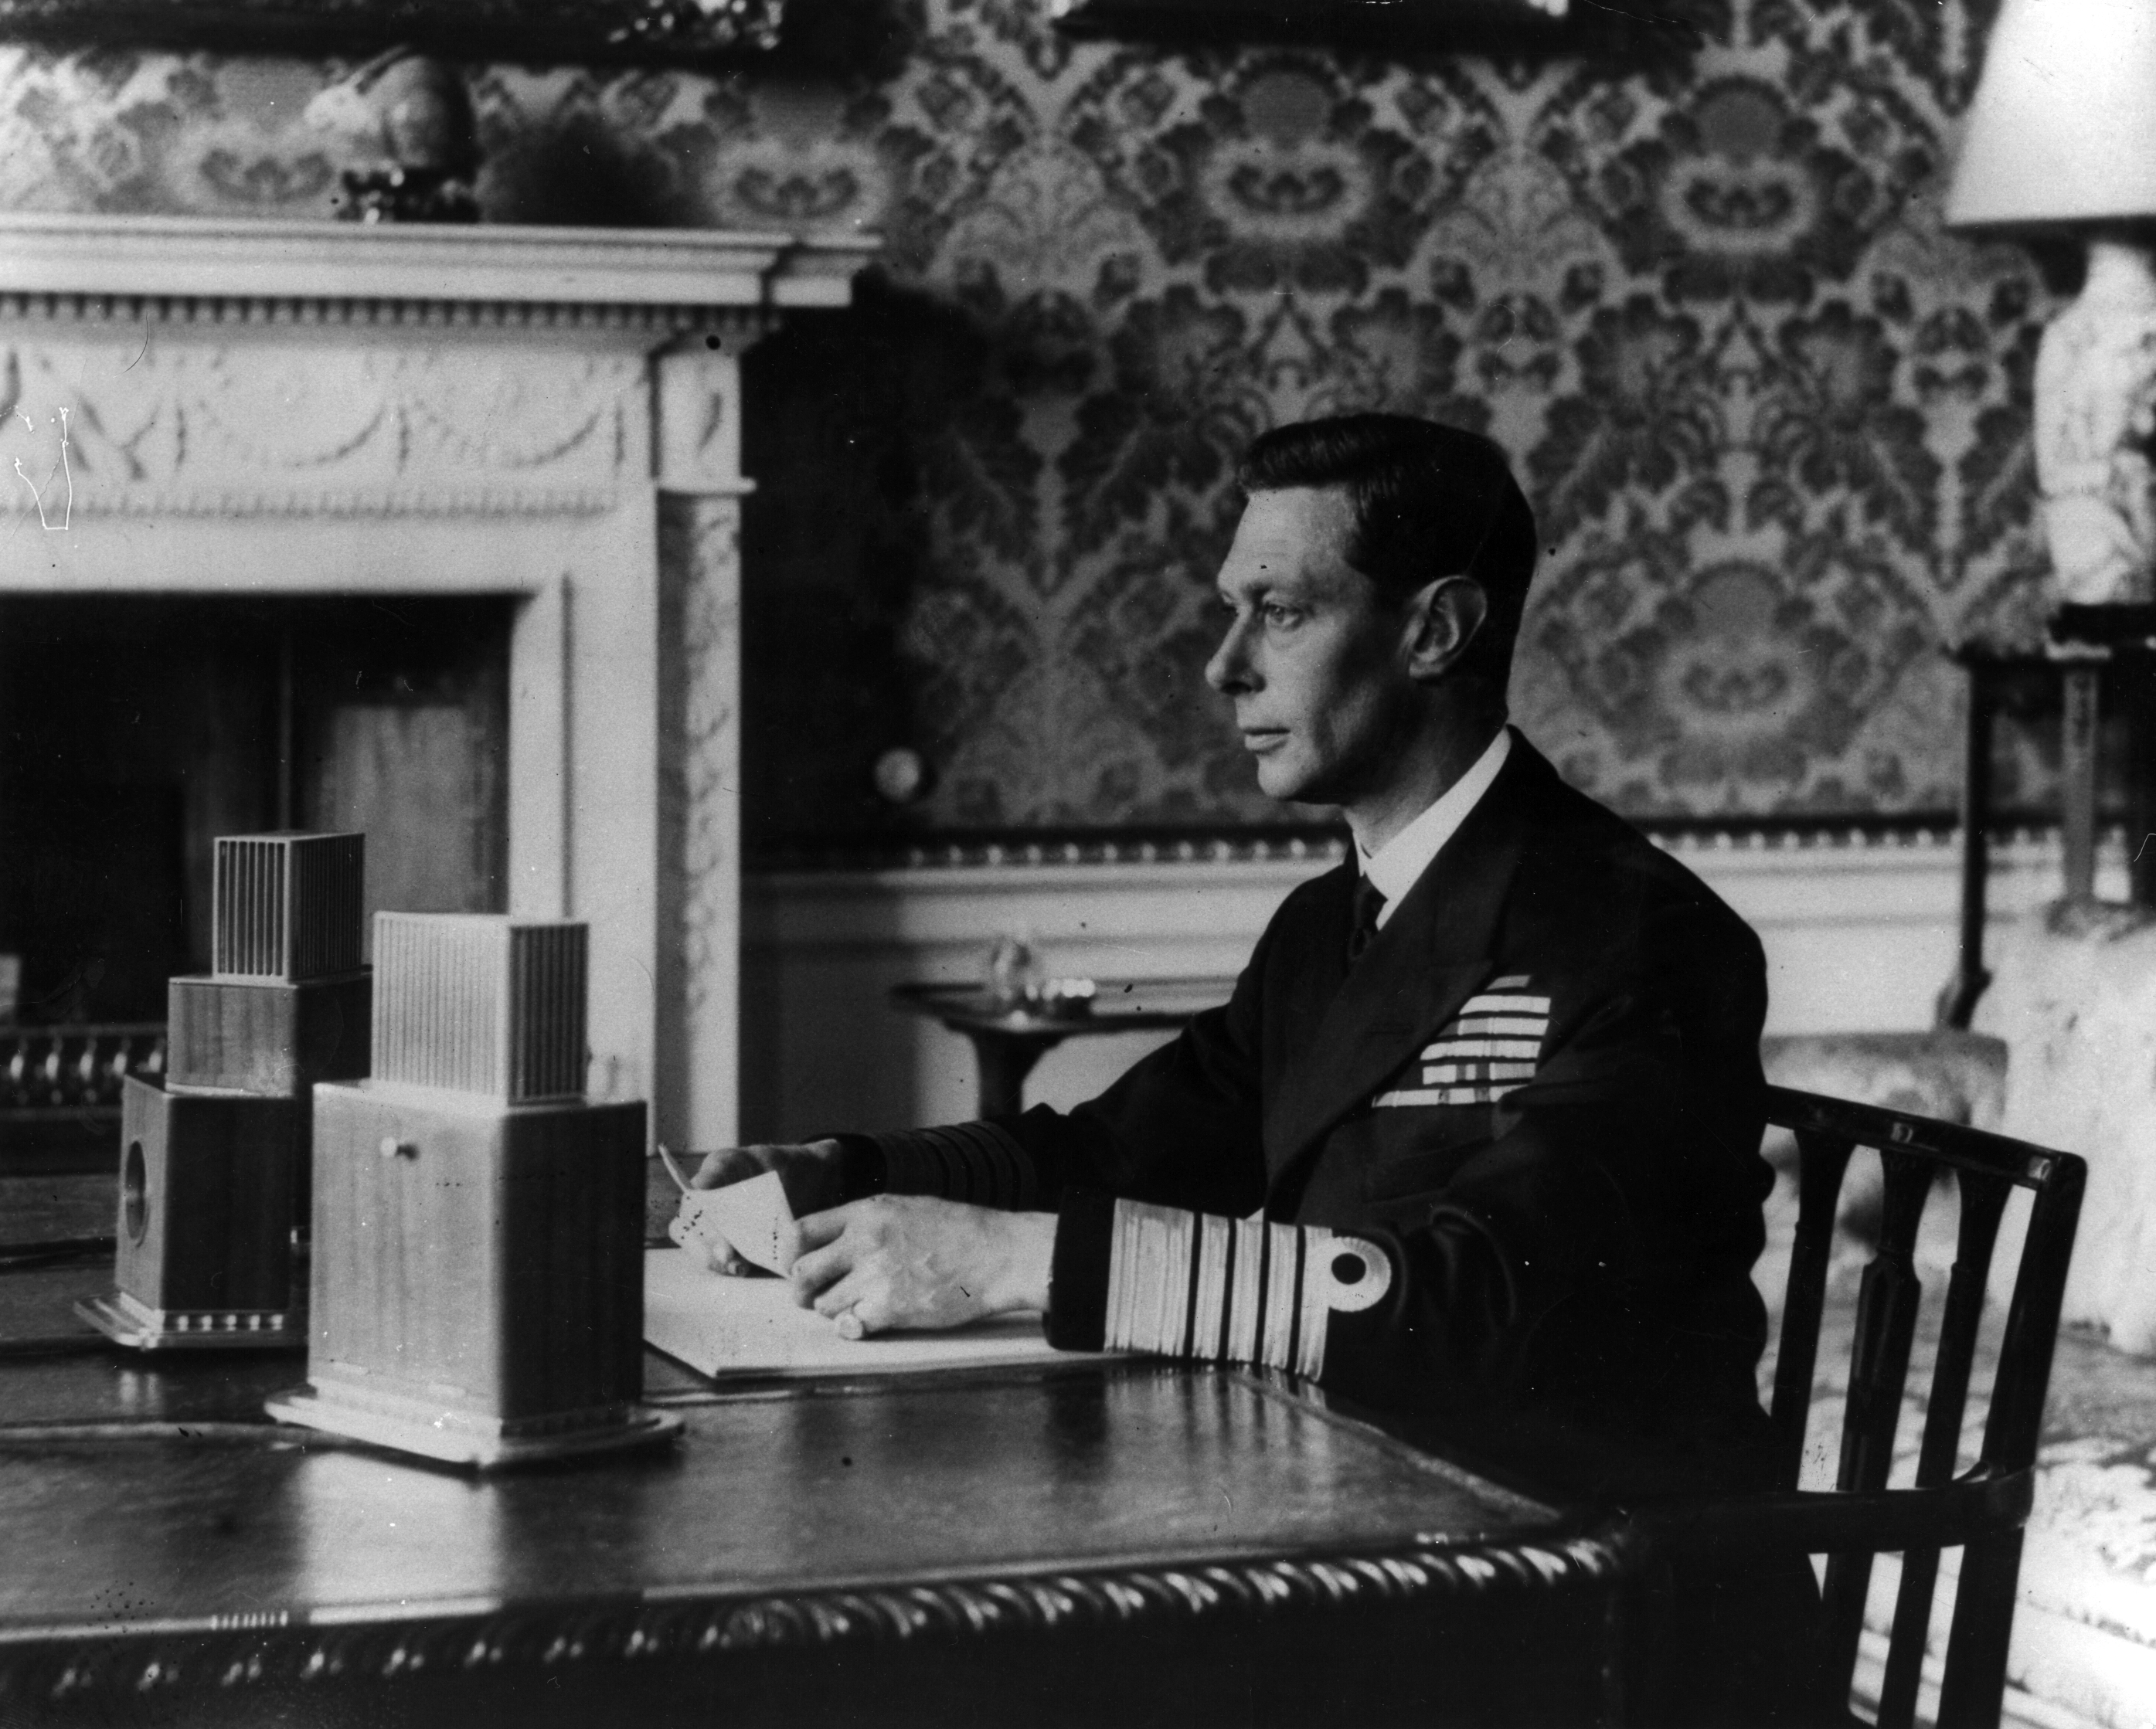 King George VI addressing the nation live over BBC news radio networks on September 3, 1939 | Source: Getty Images